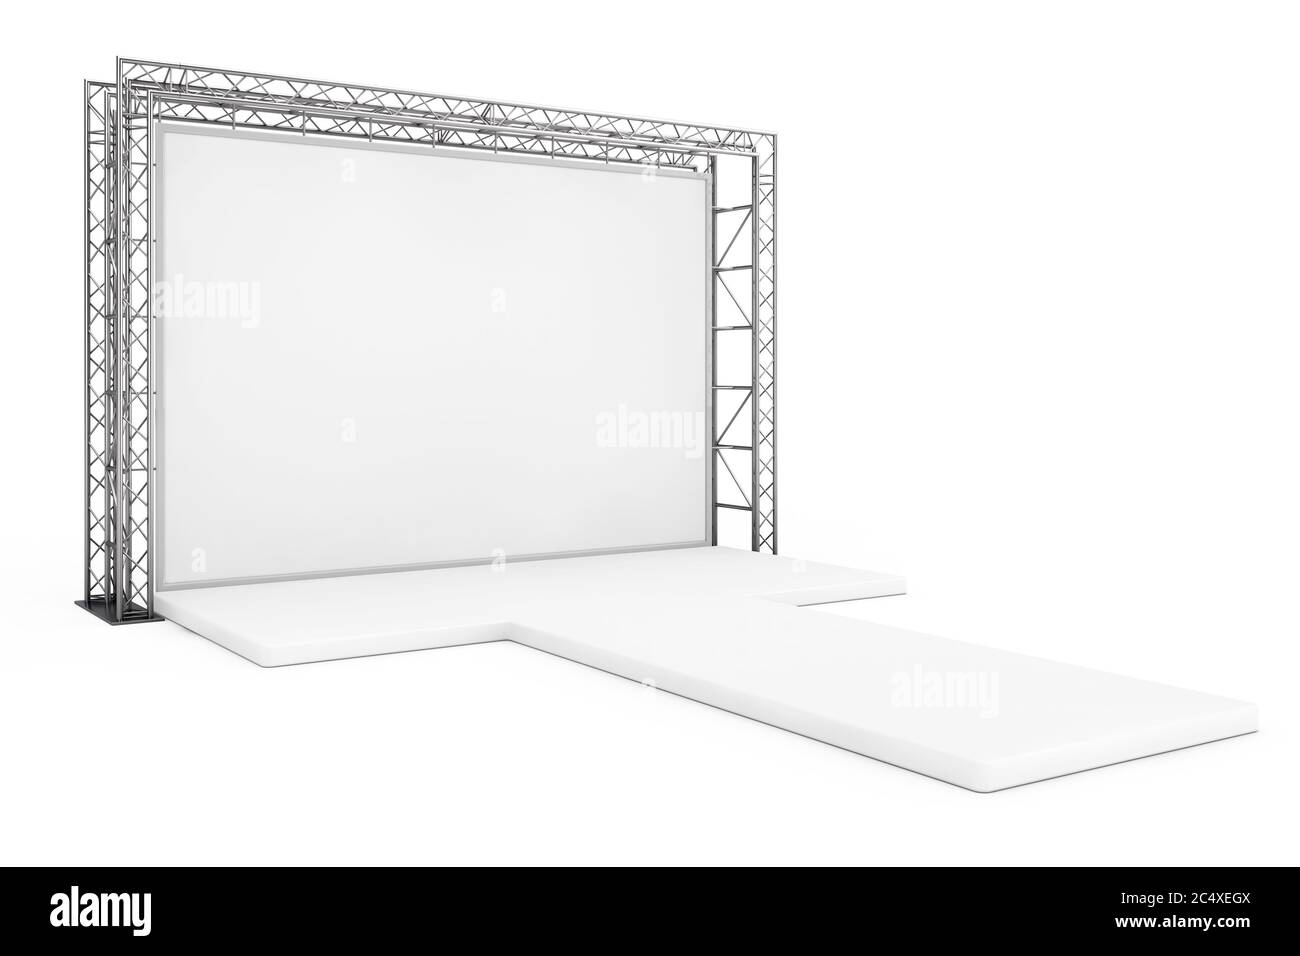 Blank Advertising Outdoor Banner on Metal Truss Construction System with Empty Podium on a white background. 3d Rendering Stock Photo